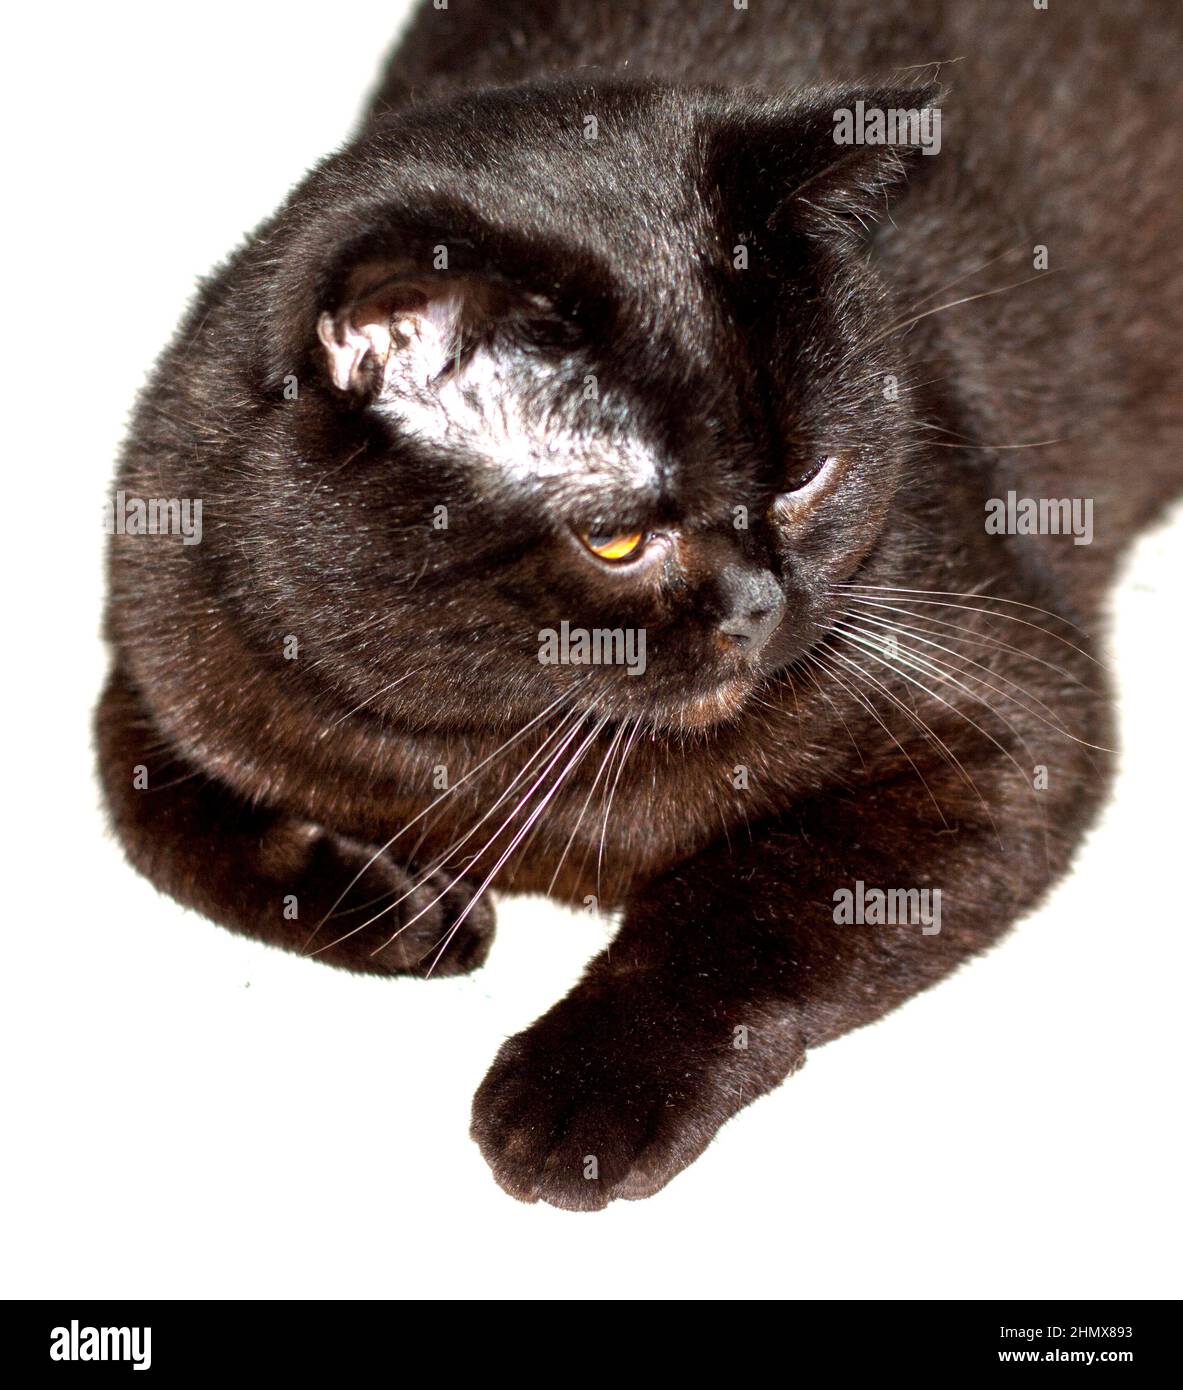 isolated portrait of a brown Scottish cat close-up, beautiful domestic purebred cats Stock Photo